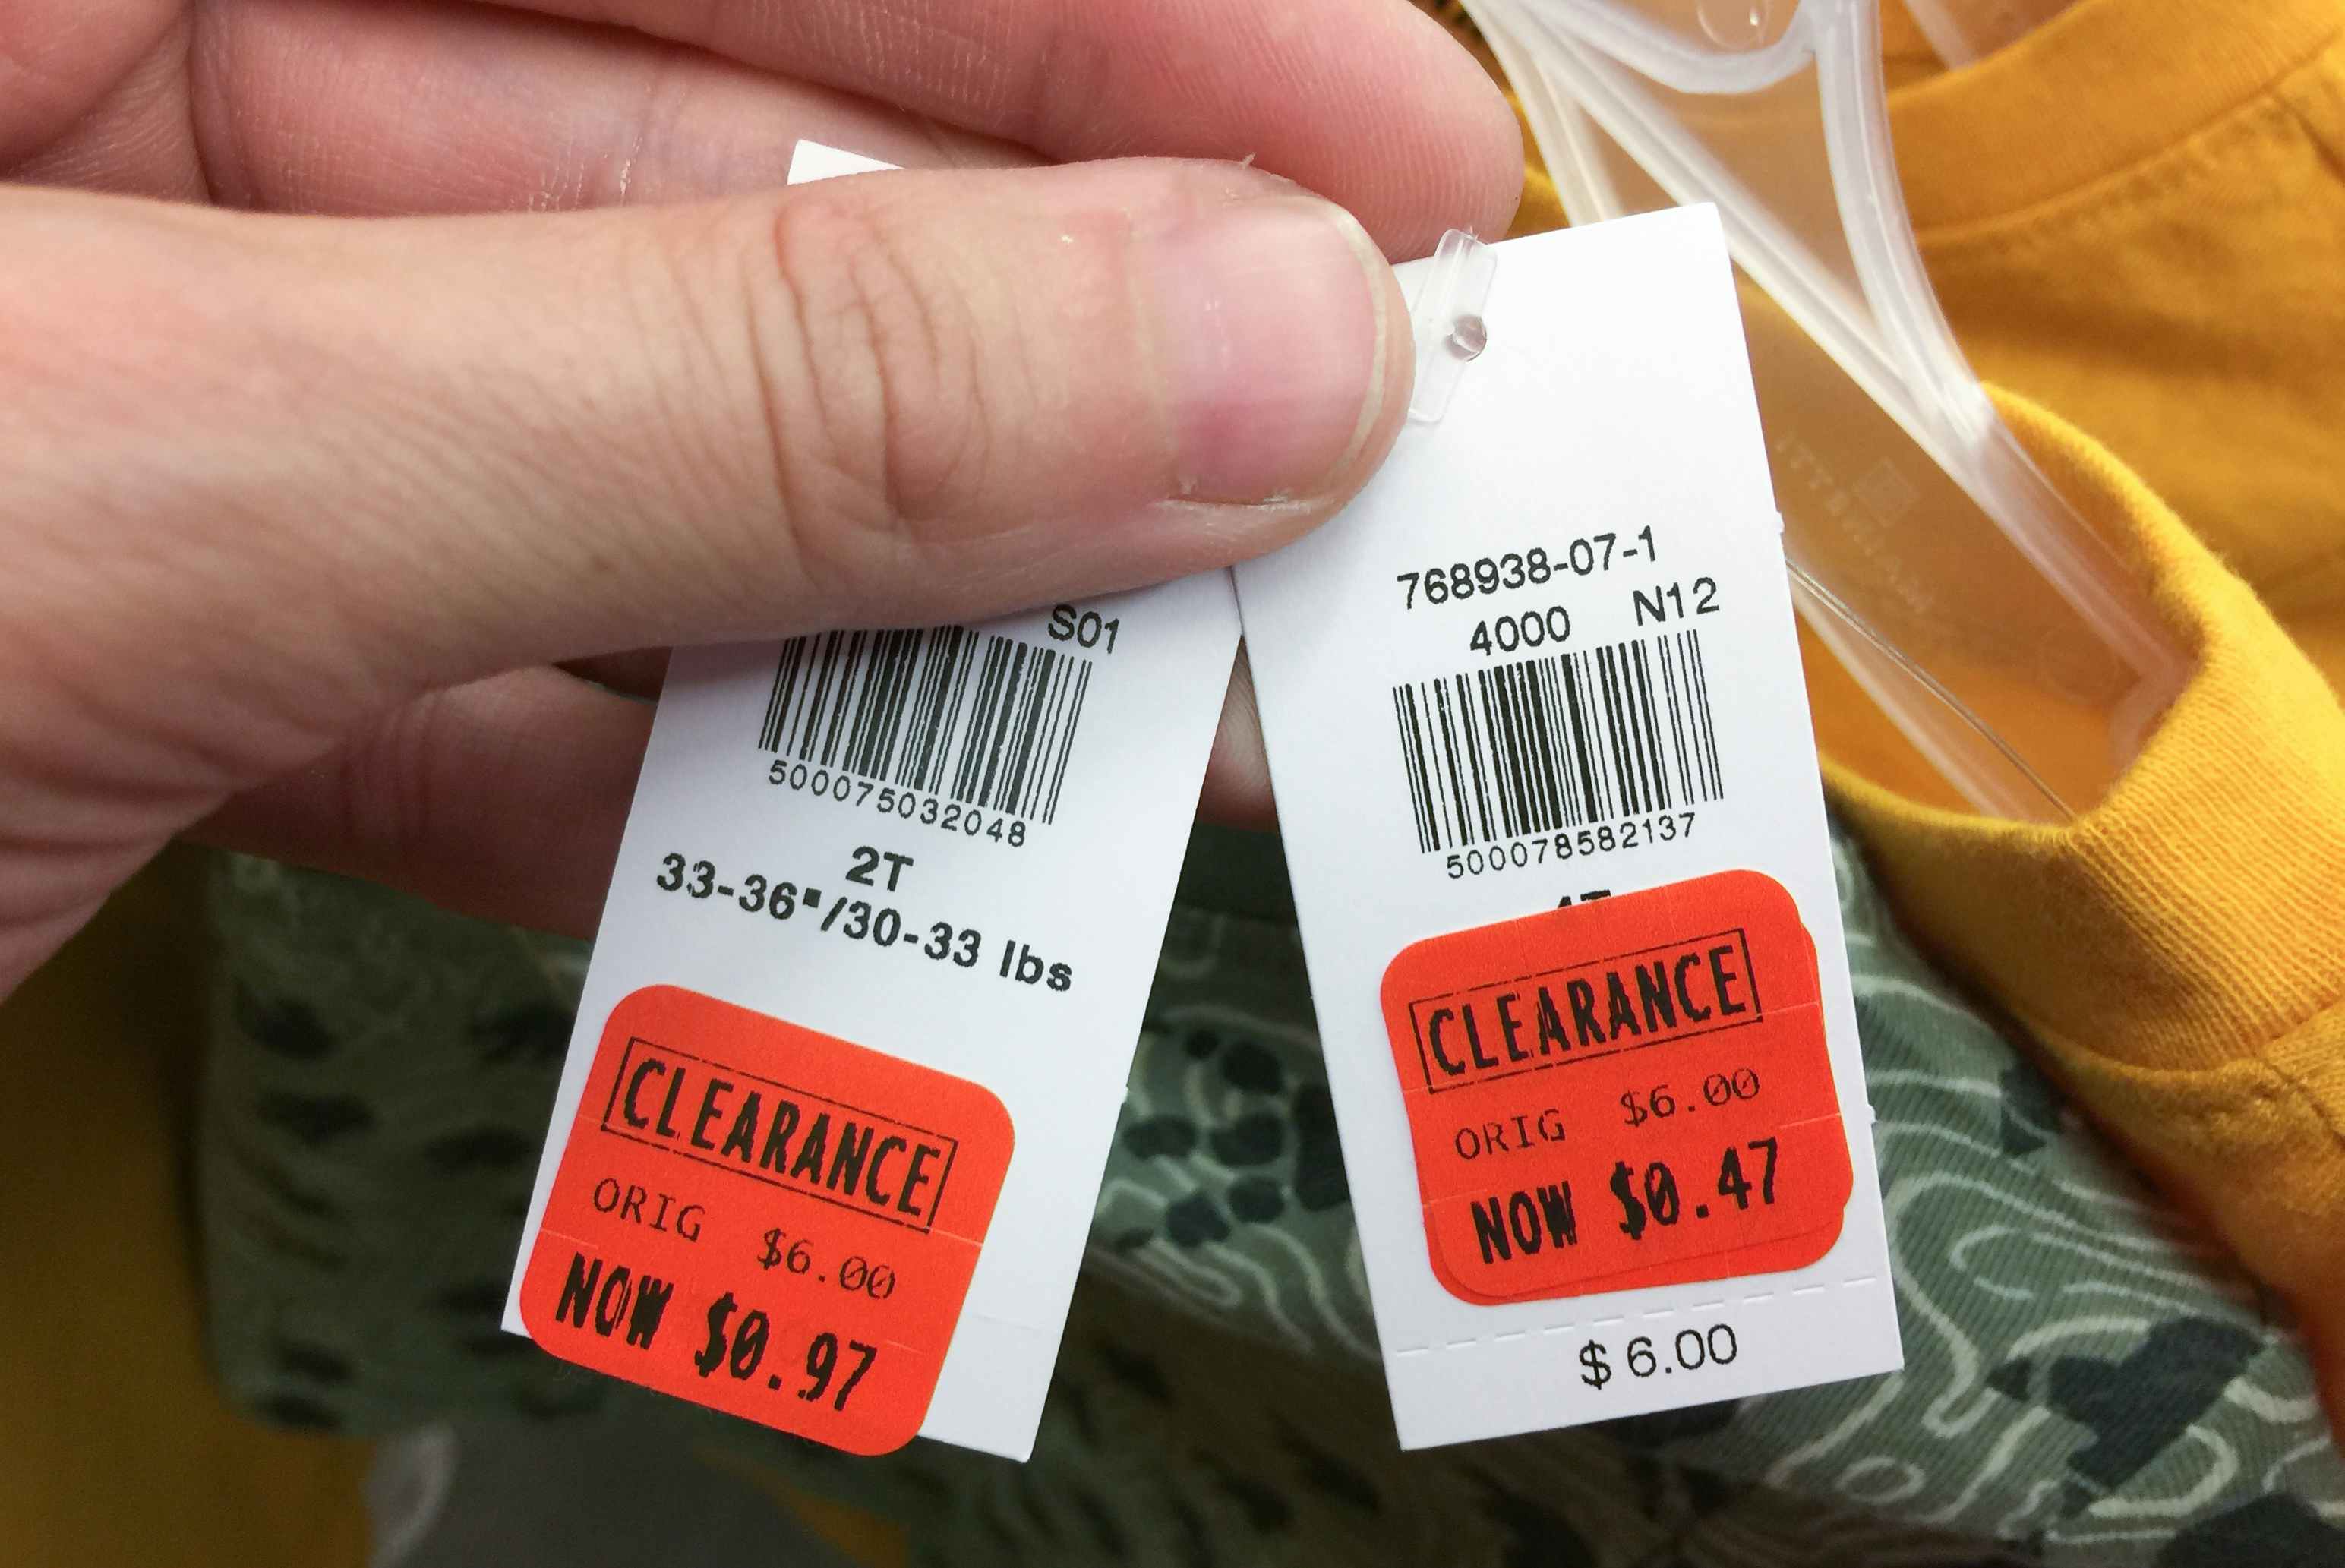 A person's hand holding up two clearance-stickered price tags, showing their marked-down prices, one being $0.97 and the other being $0.4...